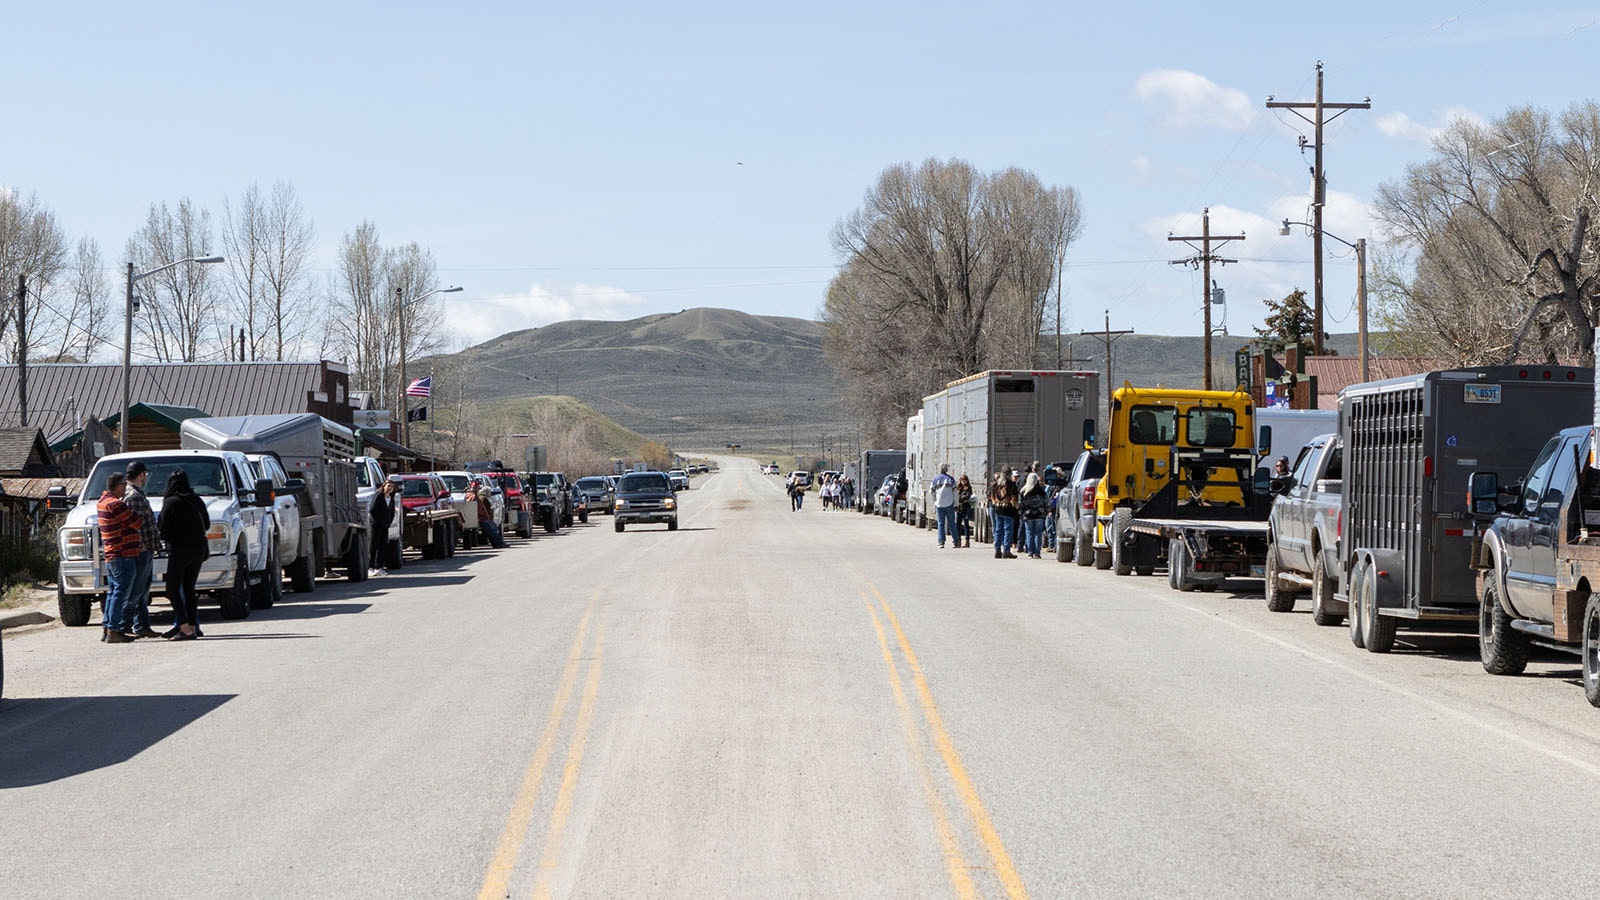 Cattle trailers and vehicles were parked in front of the Green River Bar in Daniel, Wyoming, for the Hogs For Hope motorcycle rally on May 26, 2024.